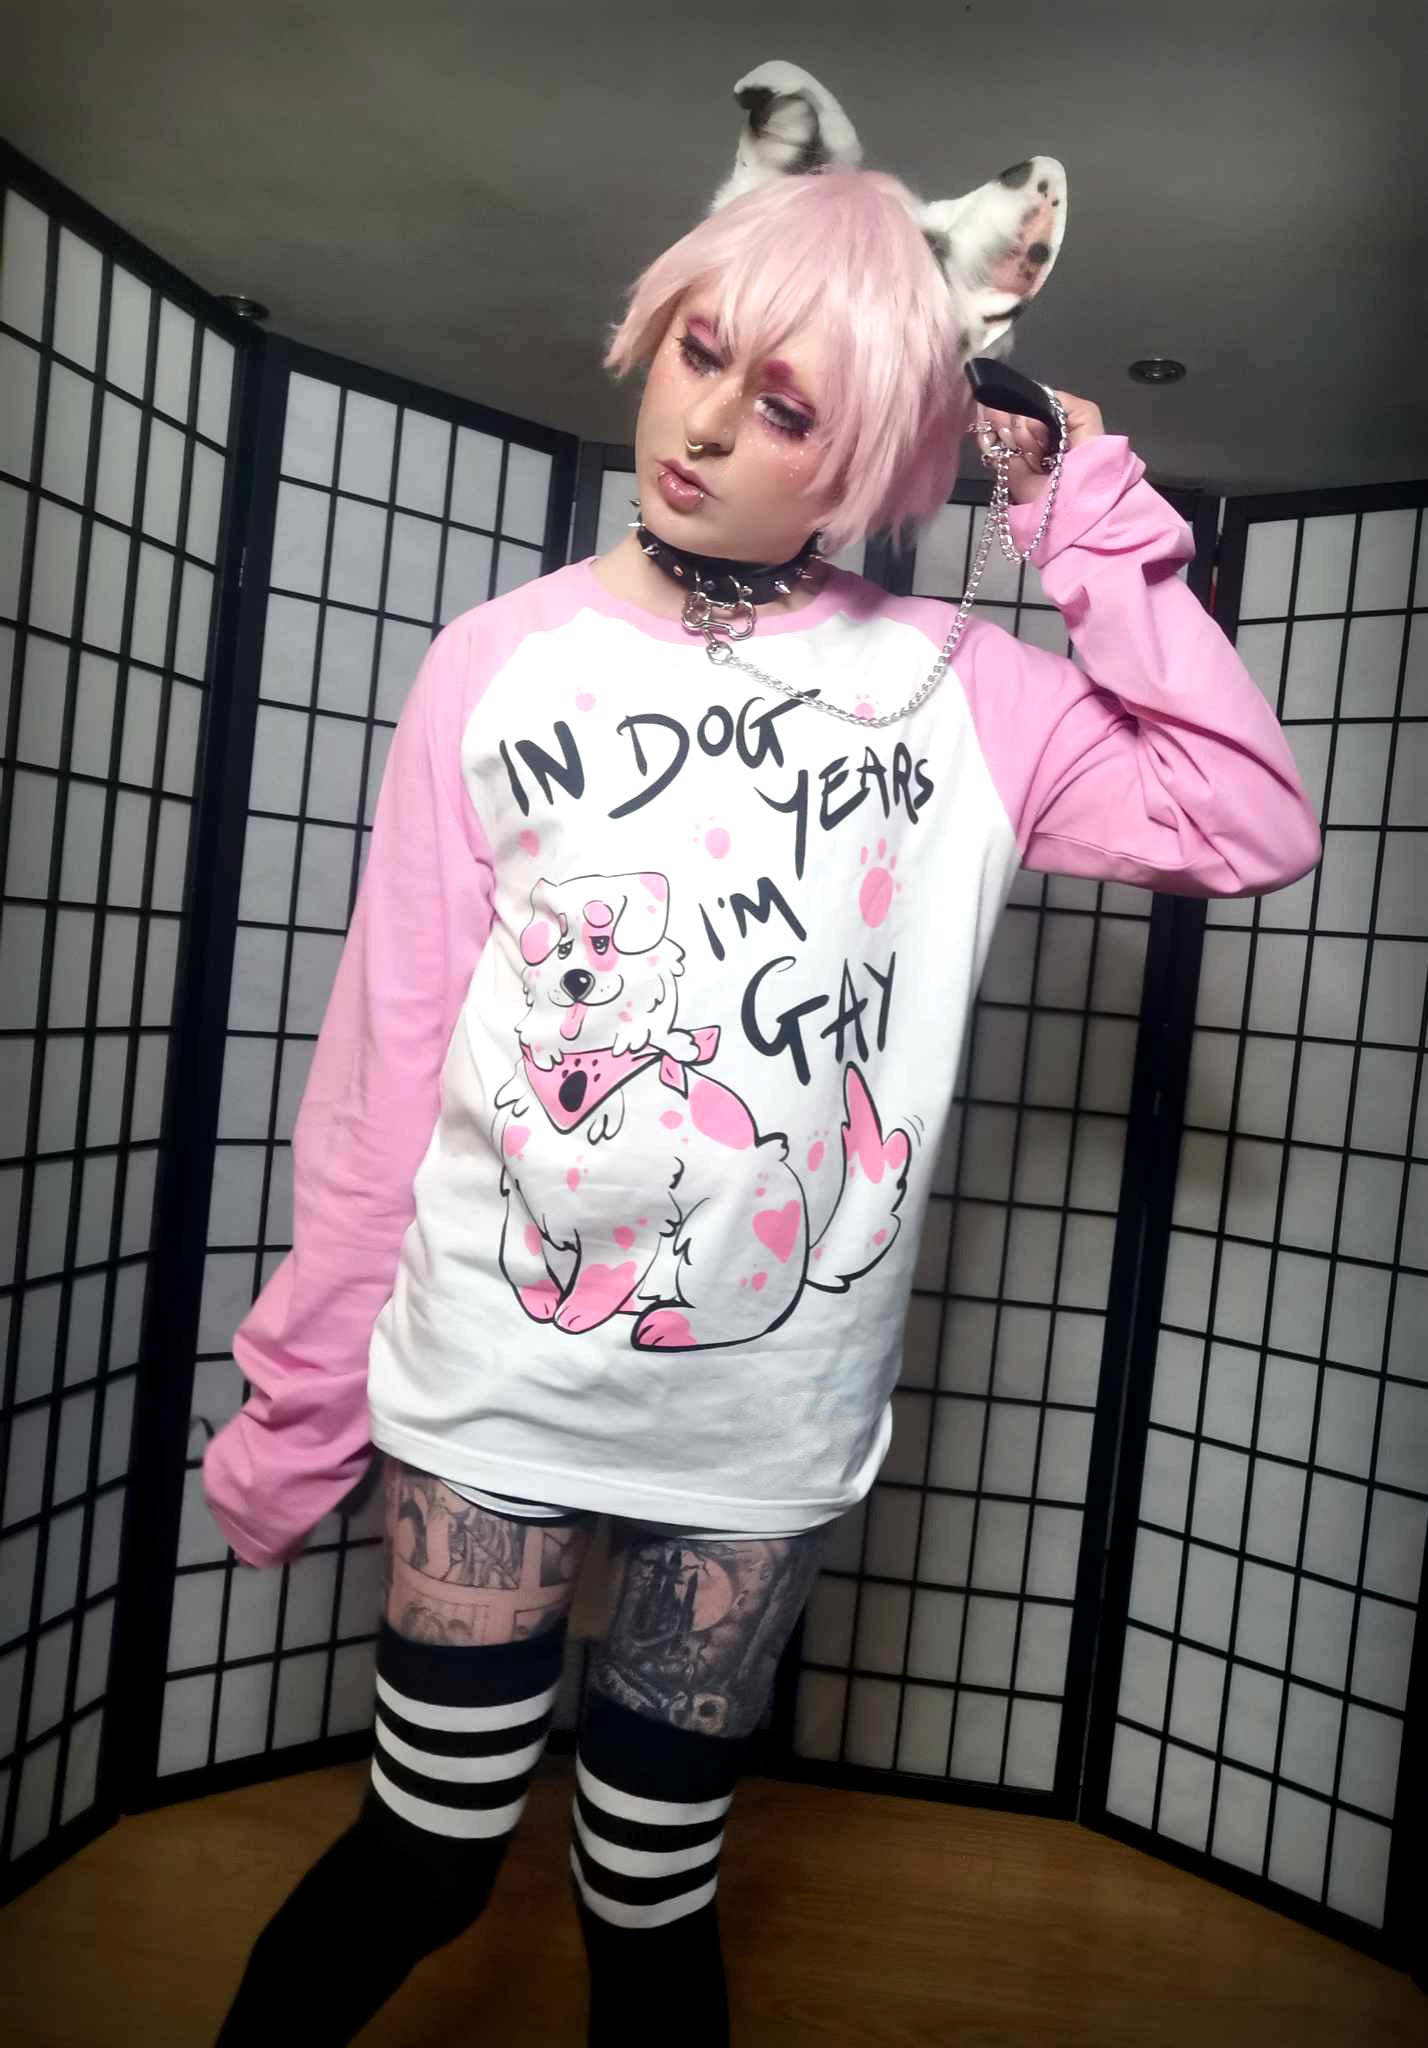 In Dog Years I'm Gay Full Outfit/T-shirt (Sizes: S-XXL)